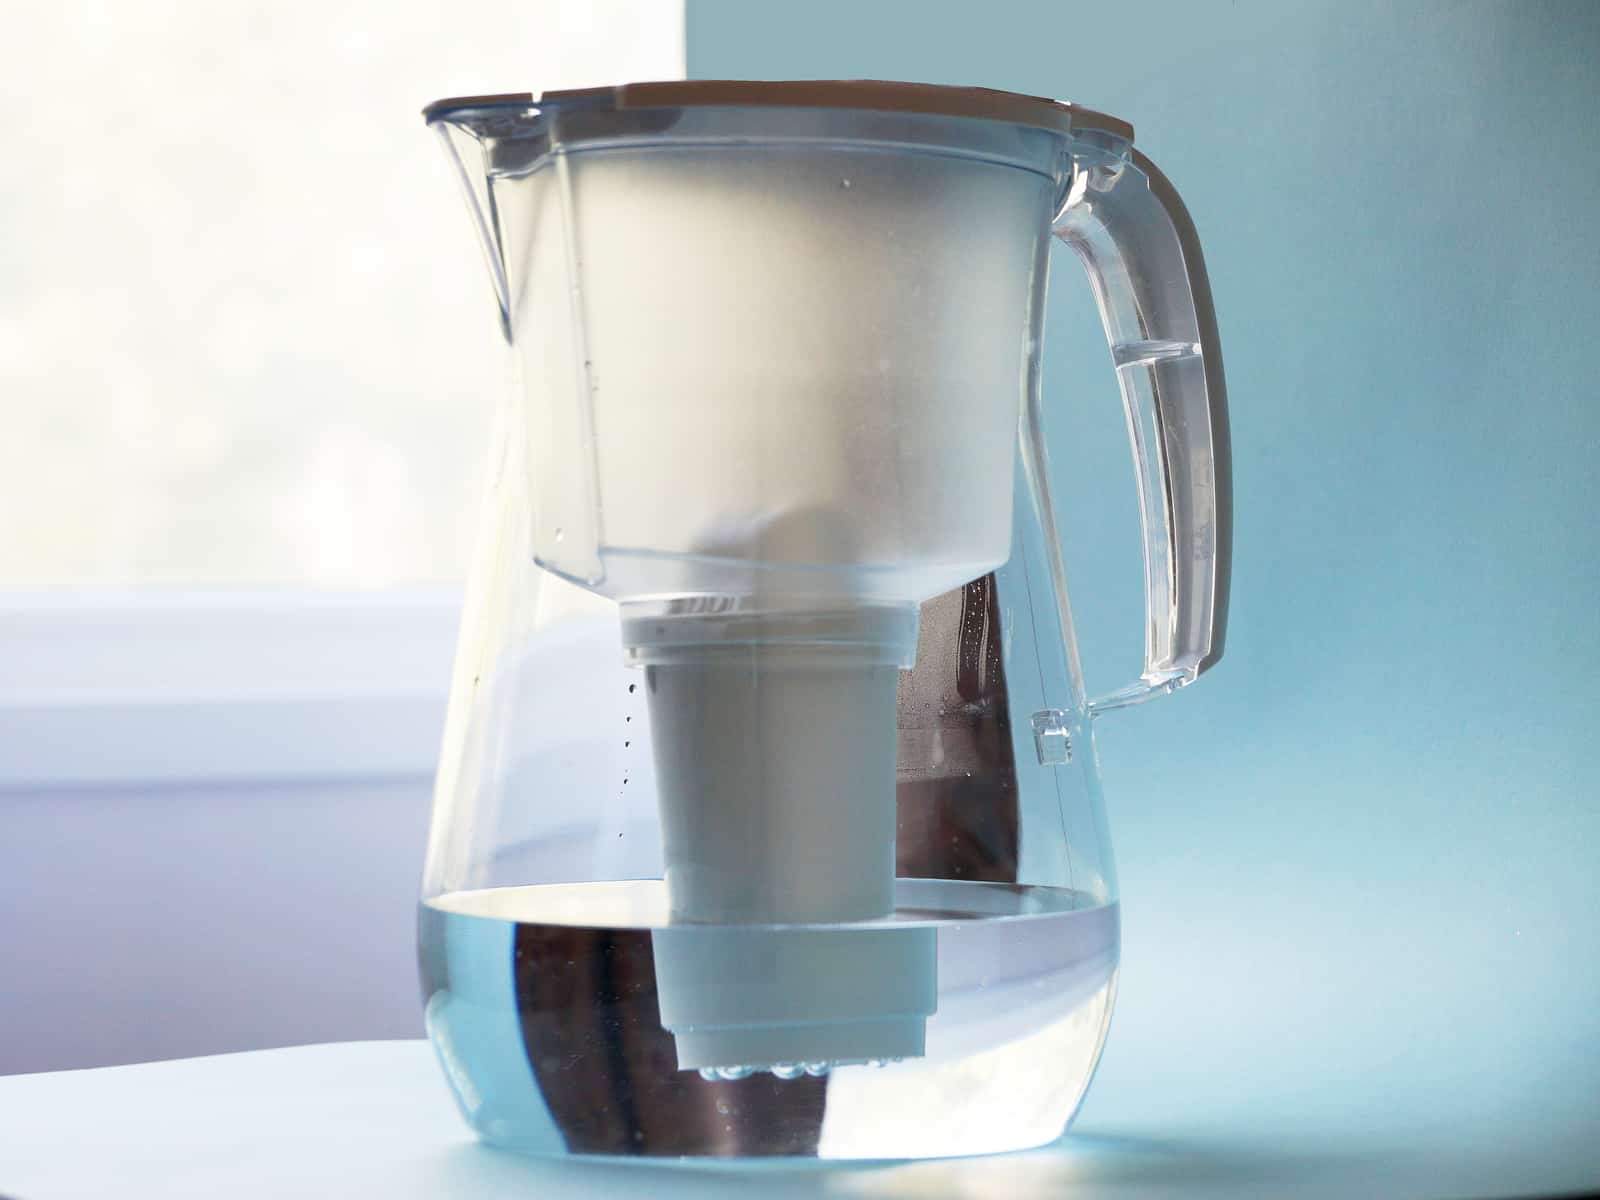 a jug for filtering water against the background of the window